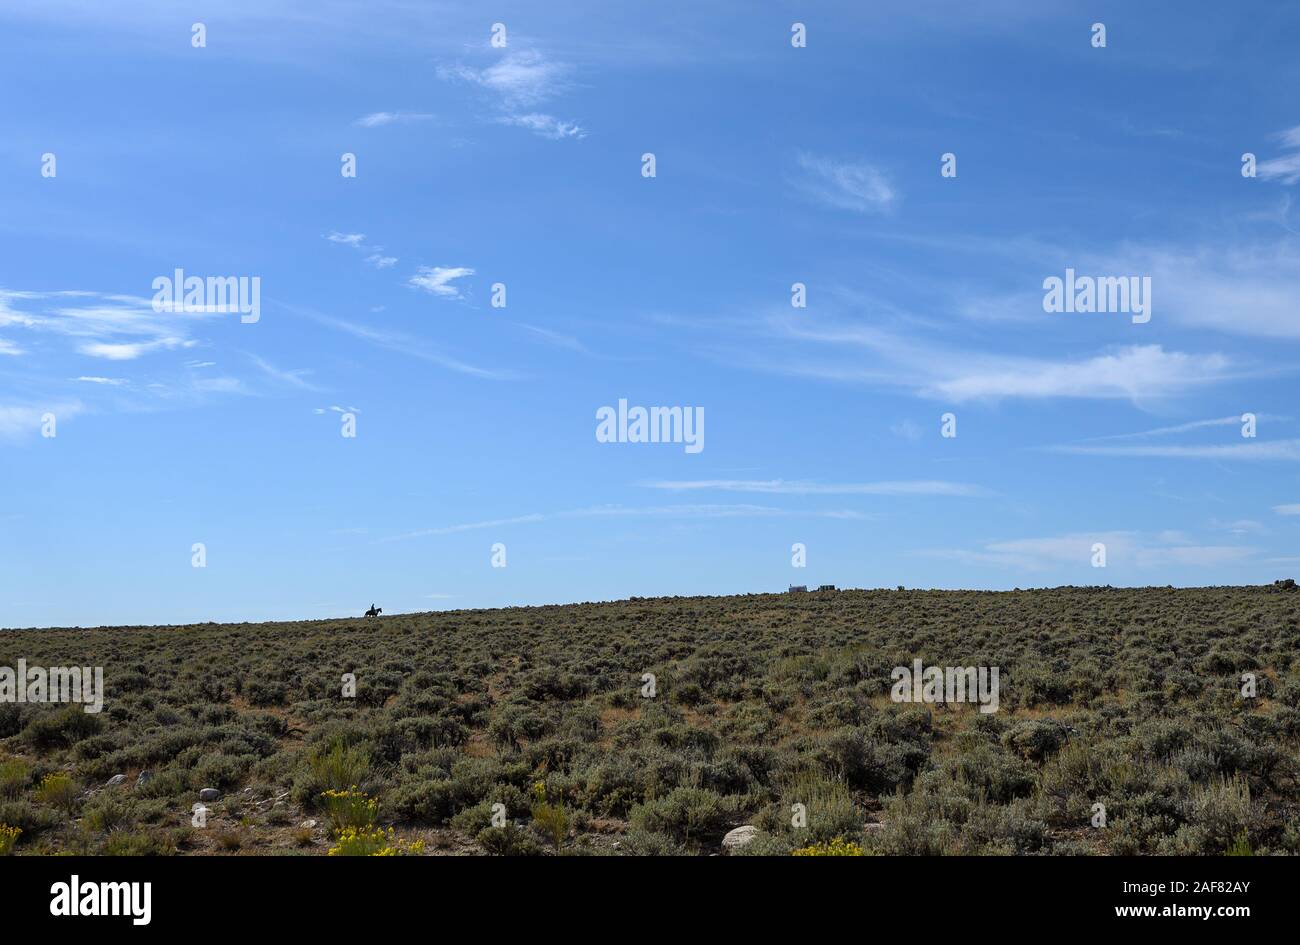 A cowboy on horse near the Wind River Mountains and Pinedale Wyoming. Stock Photo